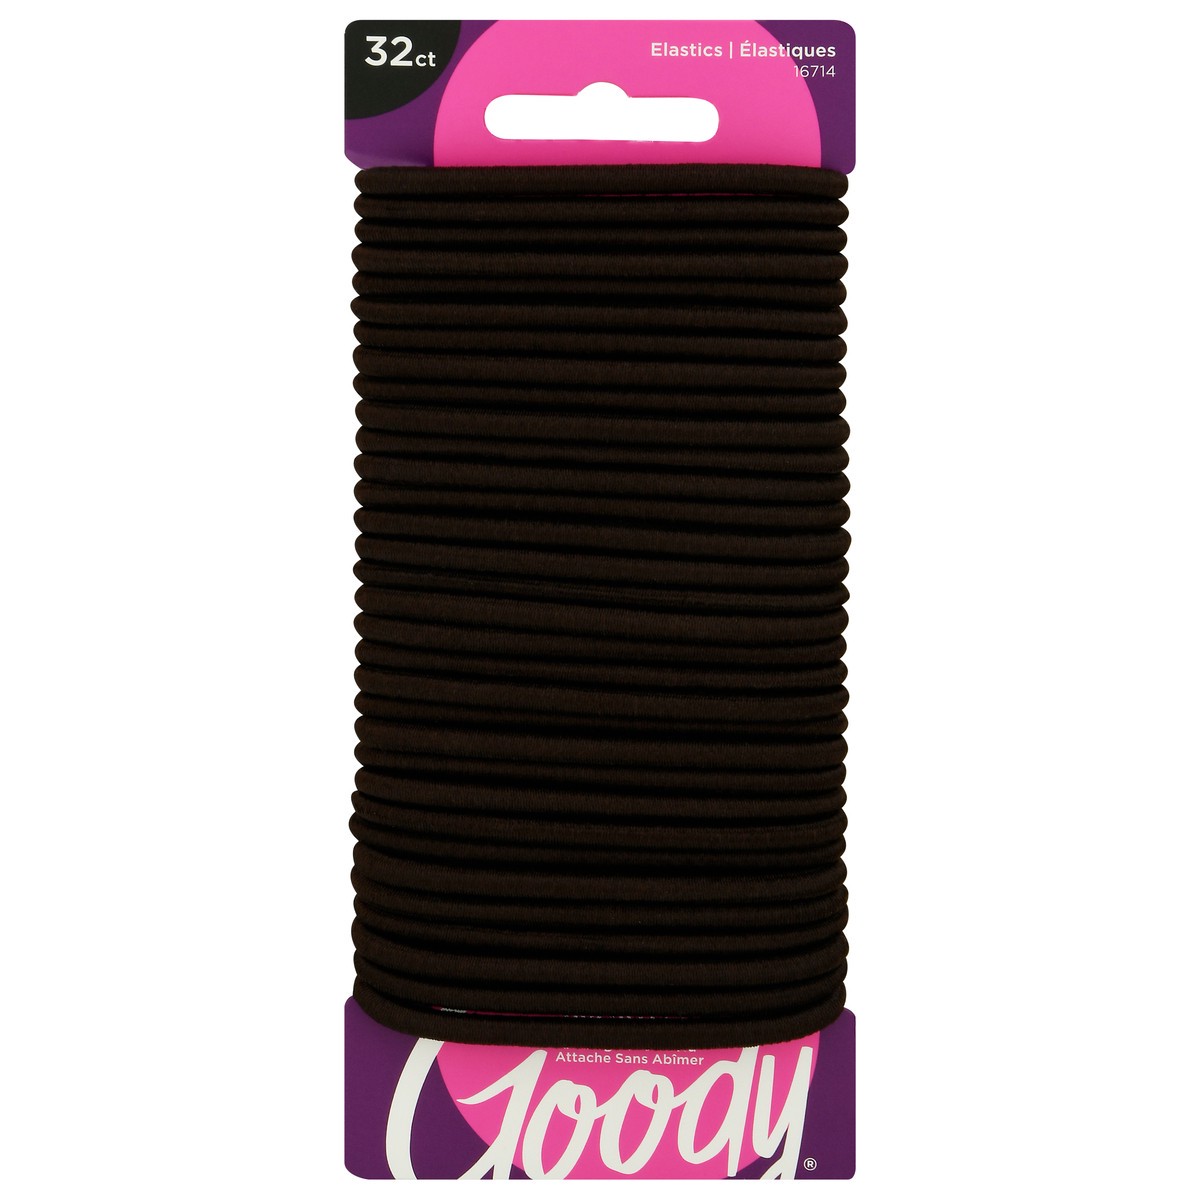 slide 1 of 9, Goody Ouchless Hair Elastics, 32 ct